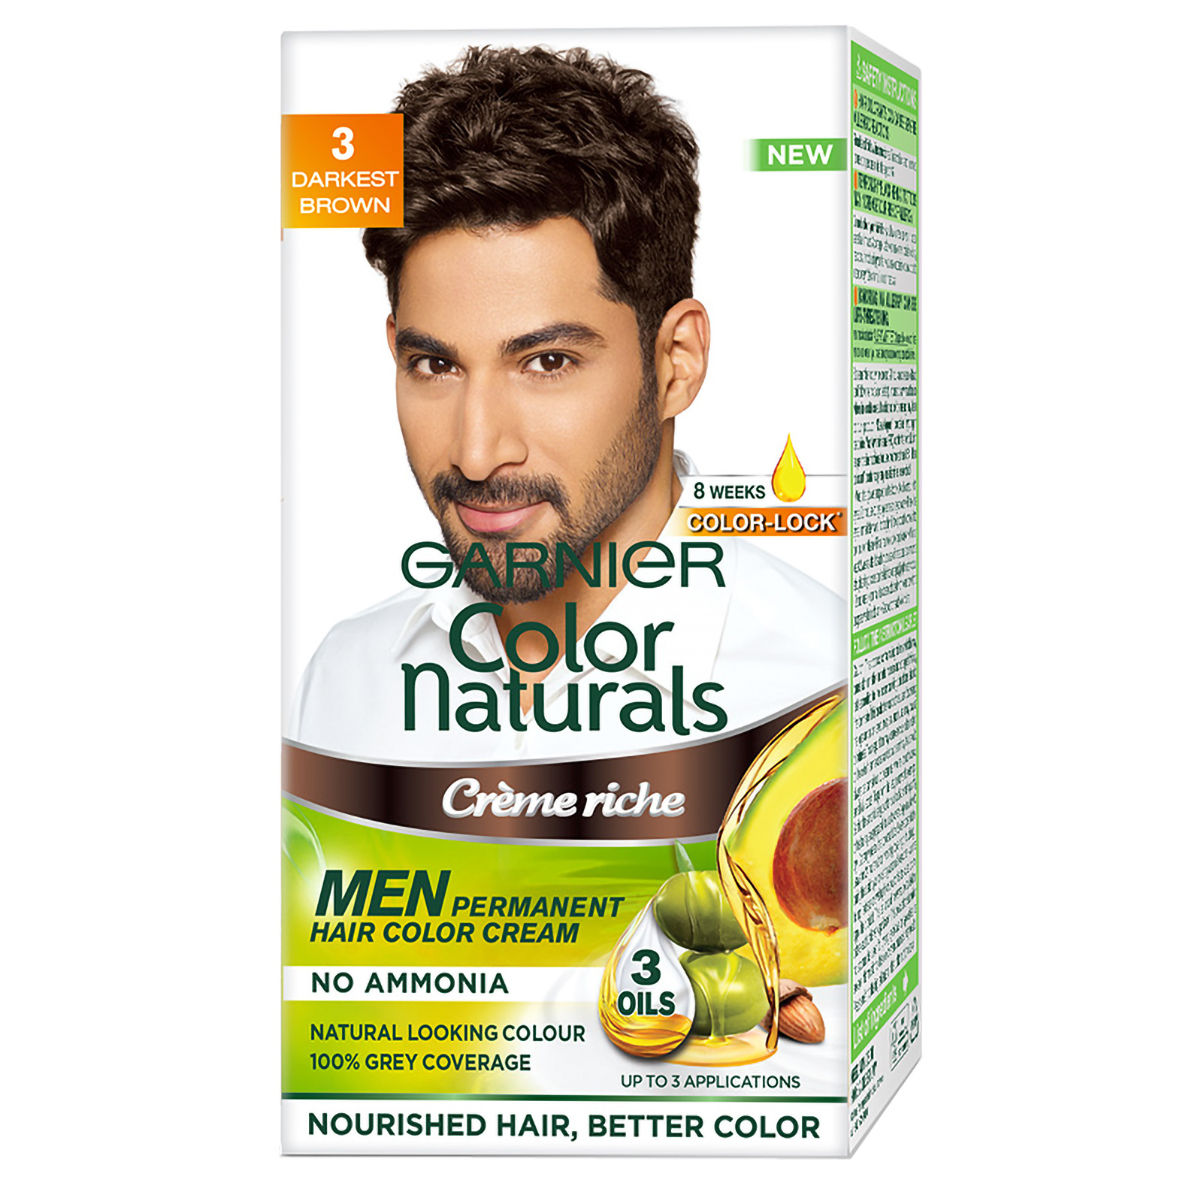 Garnier Color Naturals Men Shade 3.16 Hair Color, Burgundy, 1 Count (30ml +  30gm) Price, Uses, Side Effects, Composition - Apollo Pharmacy